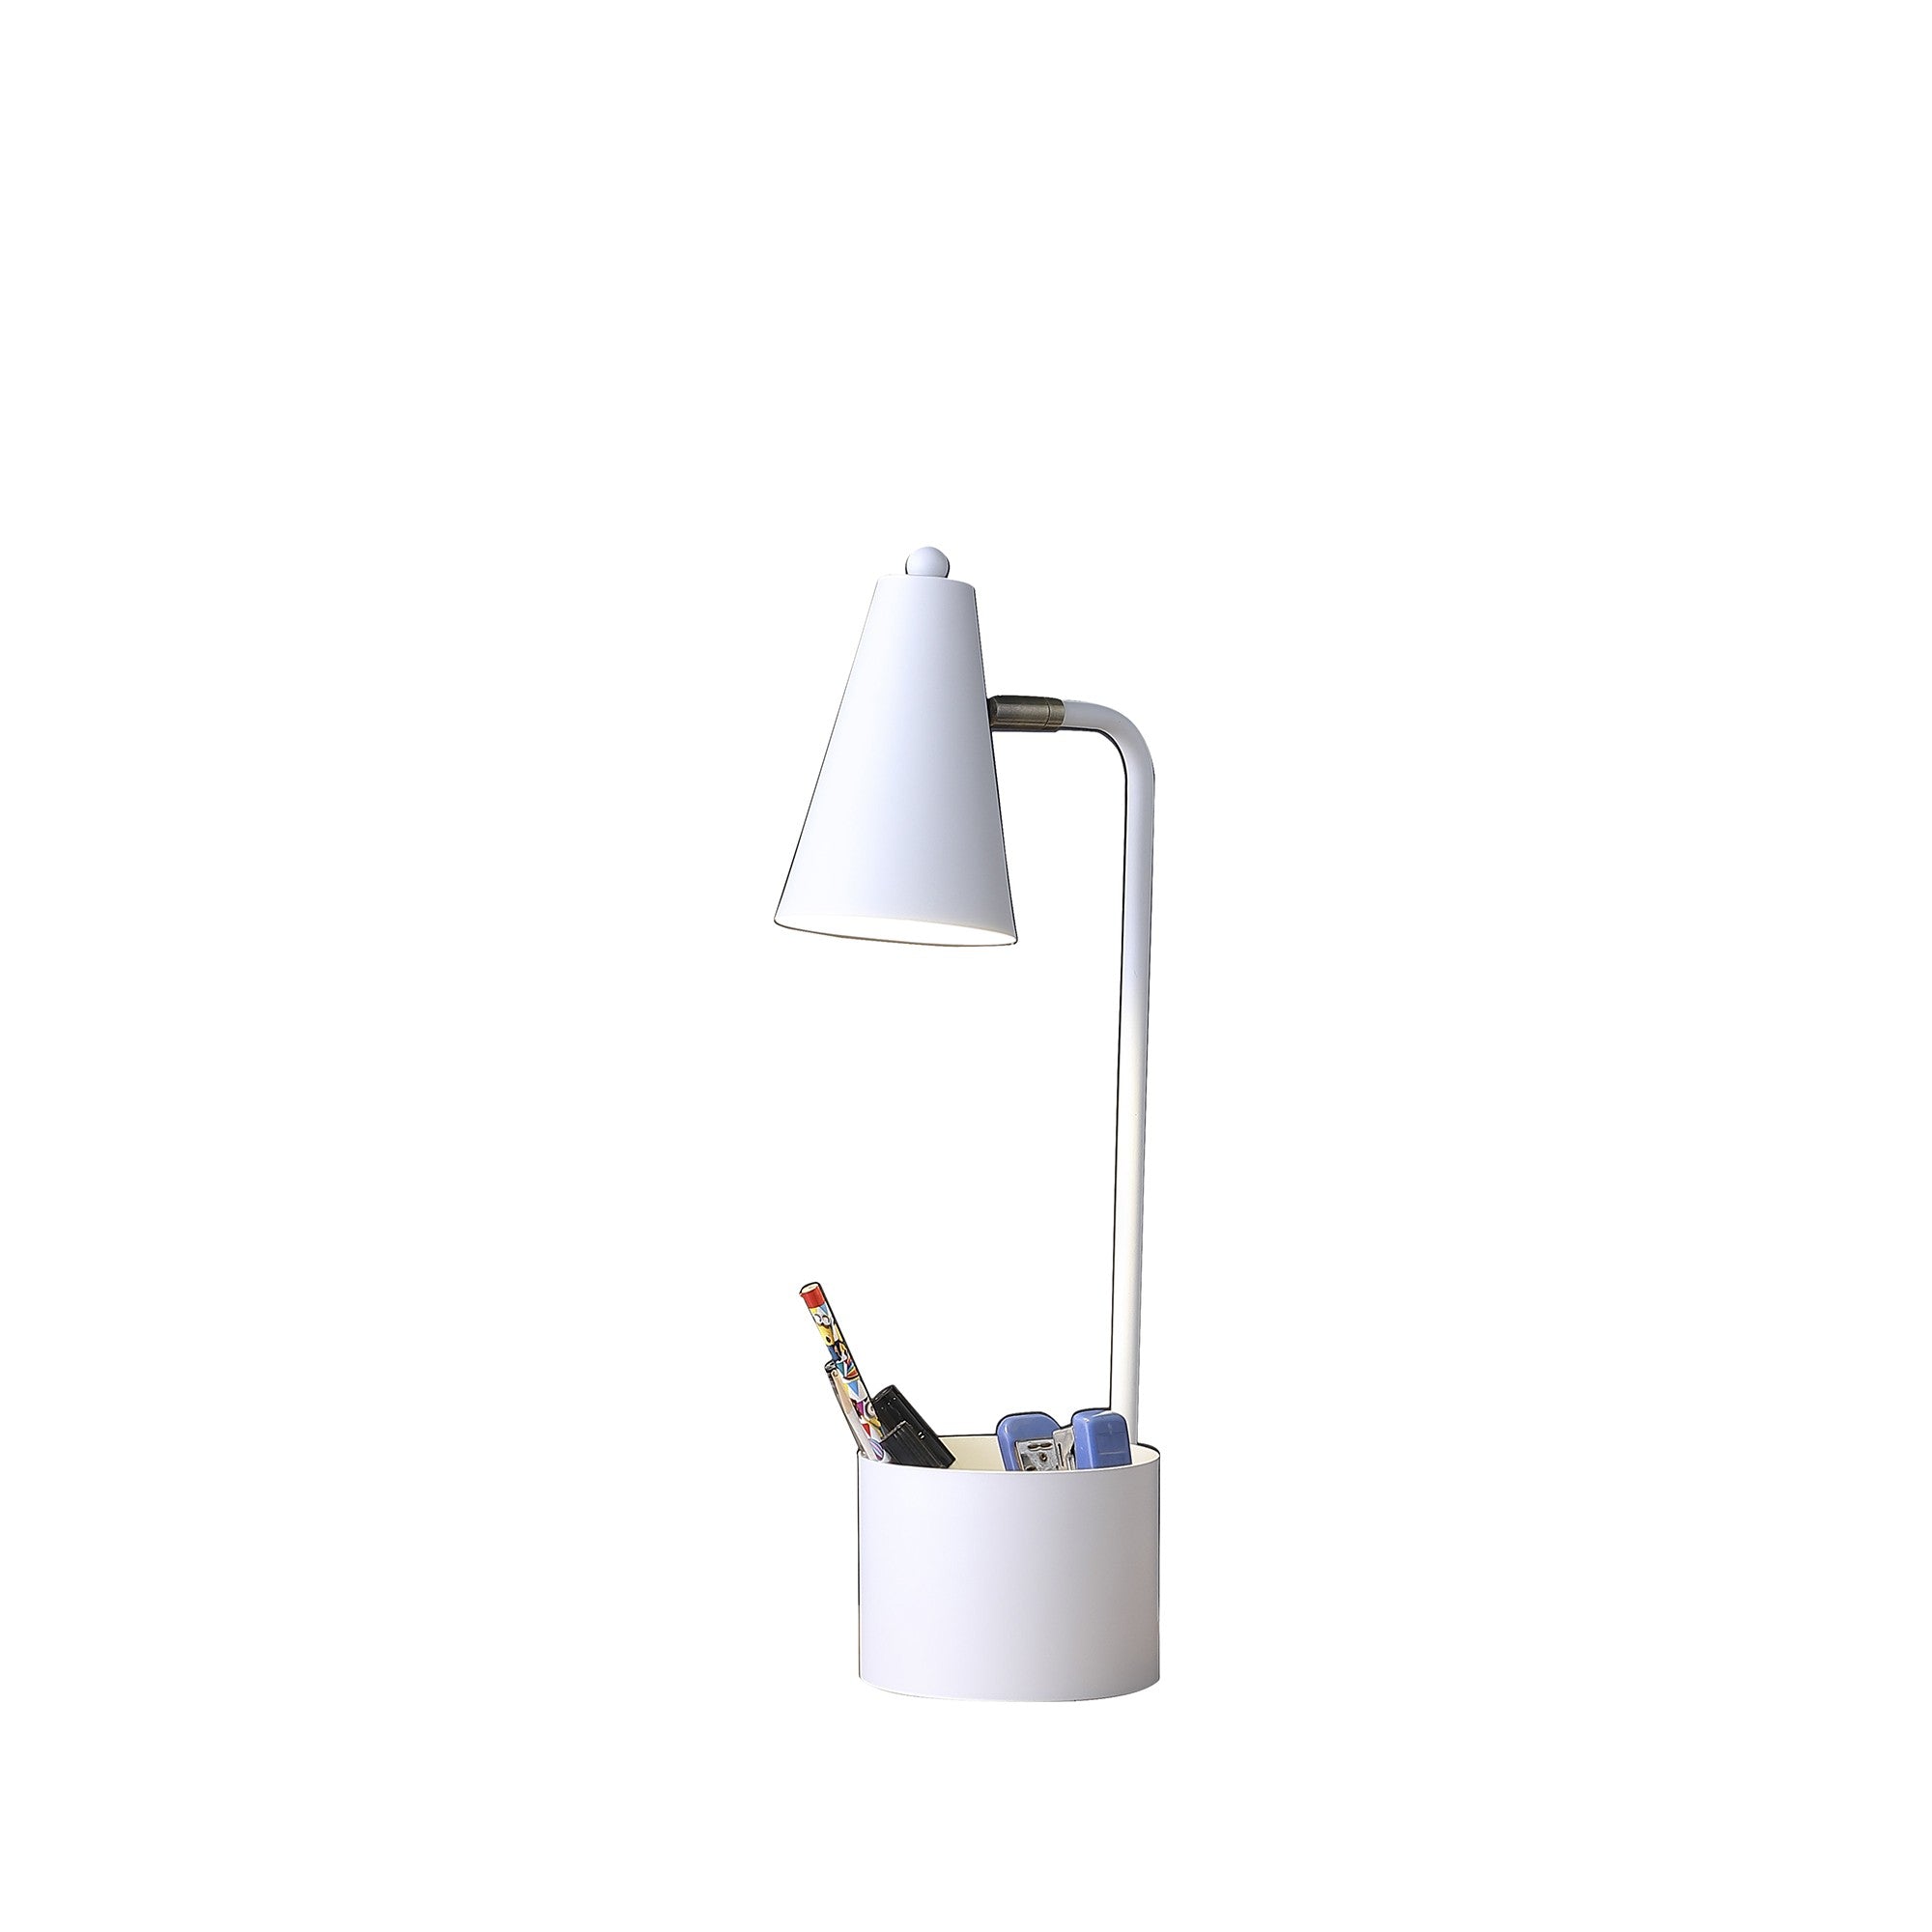 20" Compact White Student Metal Desk Lamp